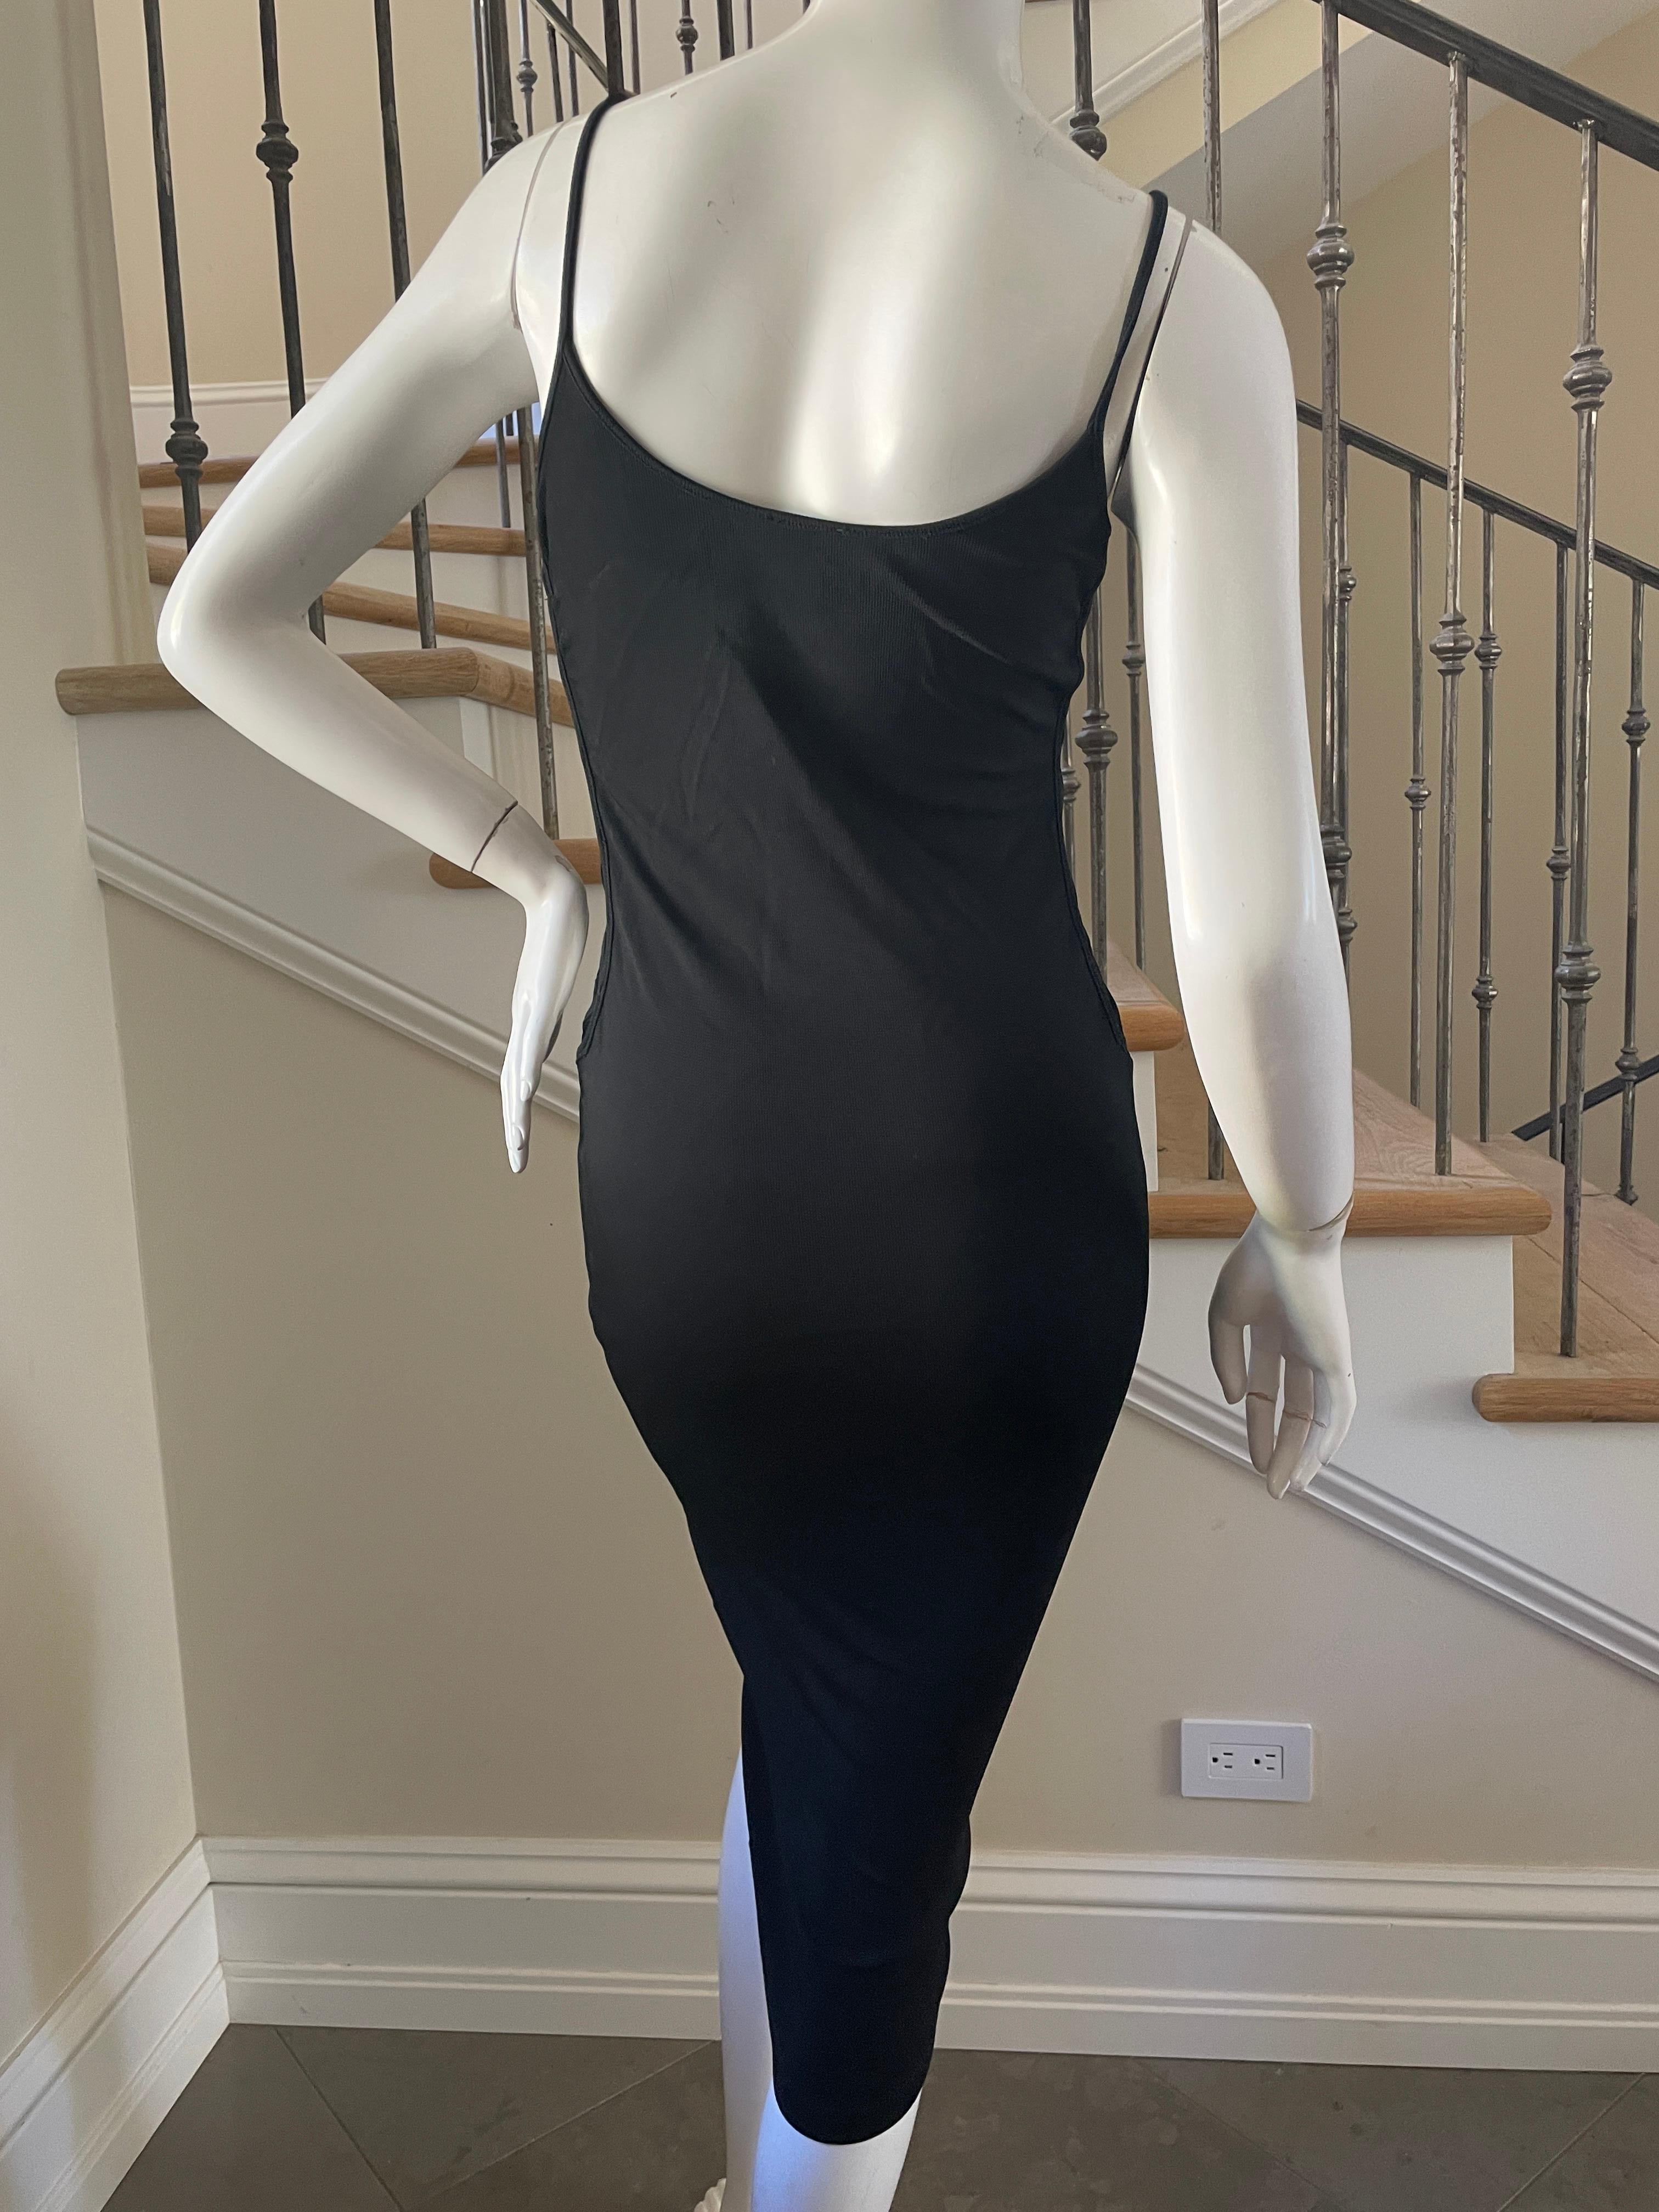 Dolce & Gabbana for D&G Vintage Black Cocktail Dress with Cut Out Laced Sides For Sale 3